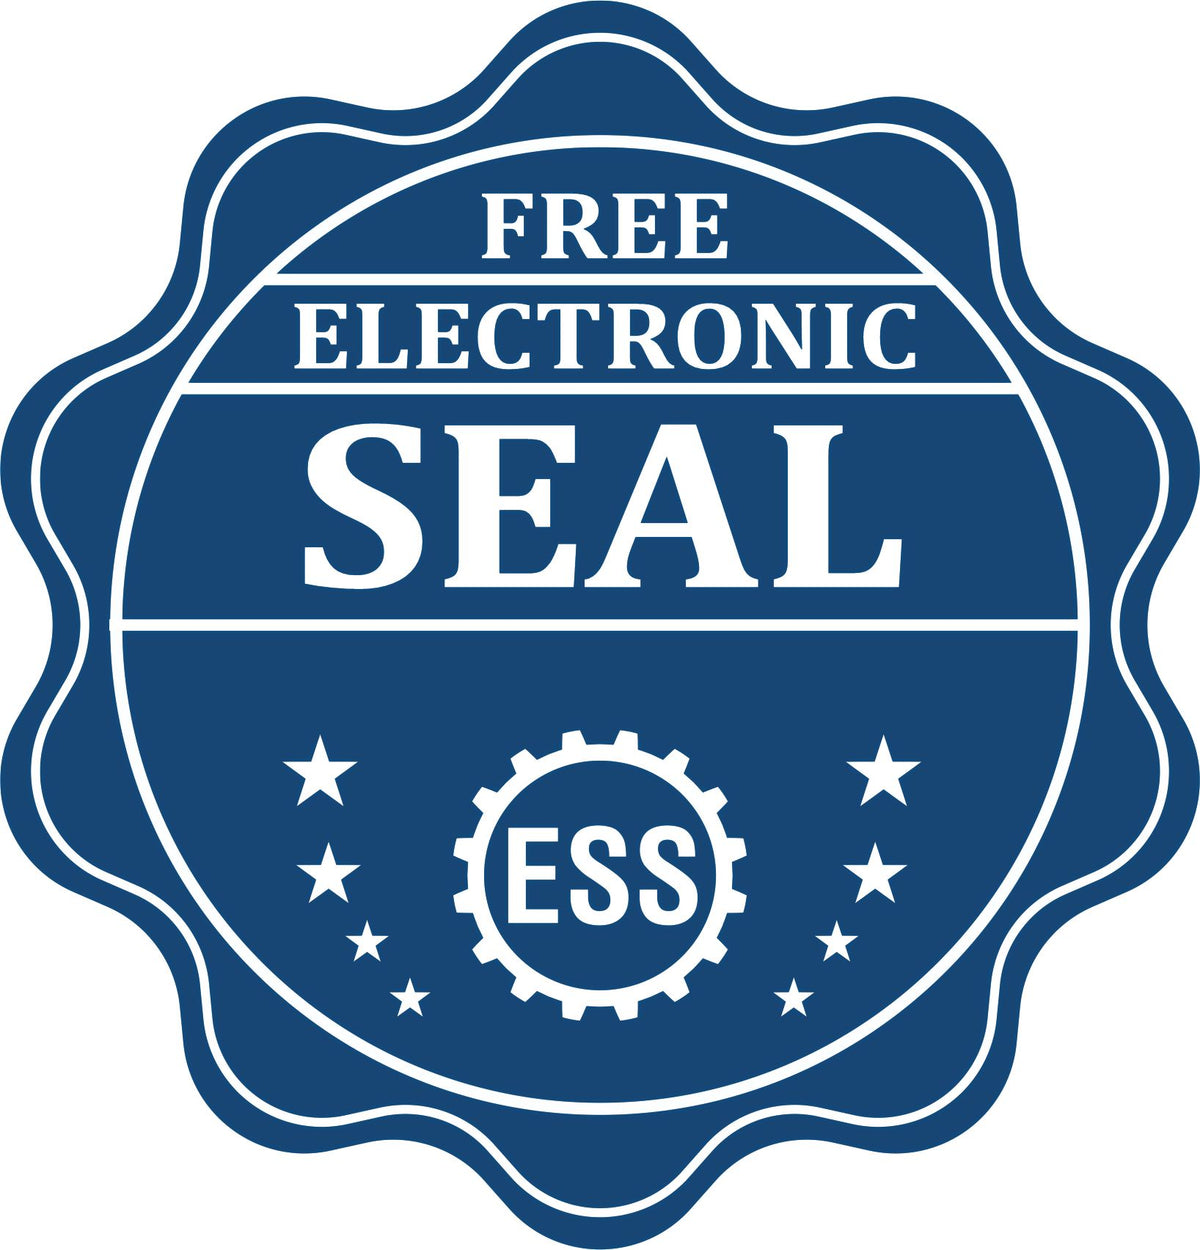 A badge showing a free electronic seal for the Slim Pre-Inked Minnesota Professional Geologist Seal Stamp with stars and the ESS gear on the emblem.